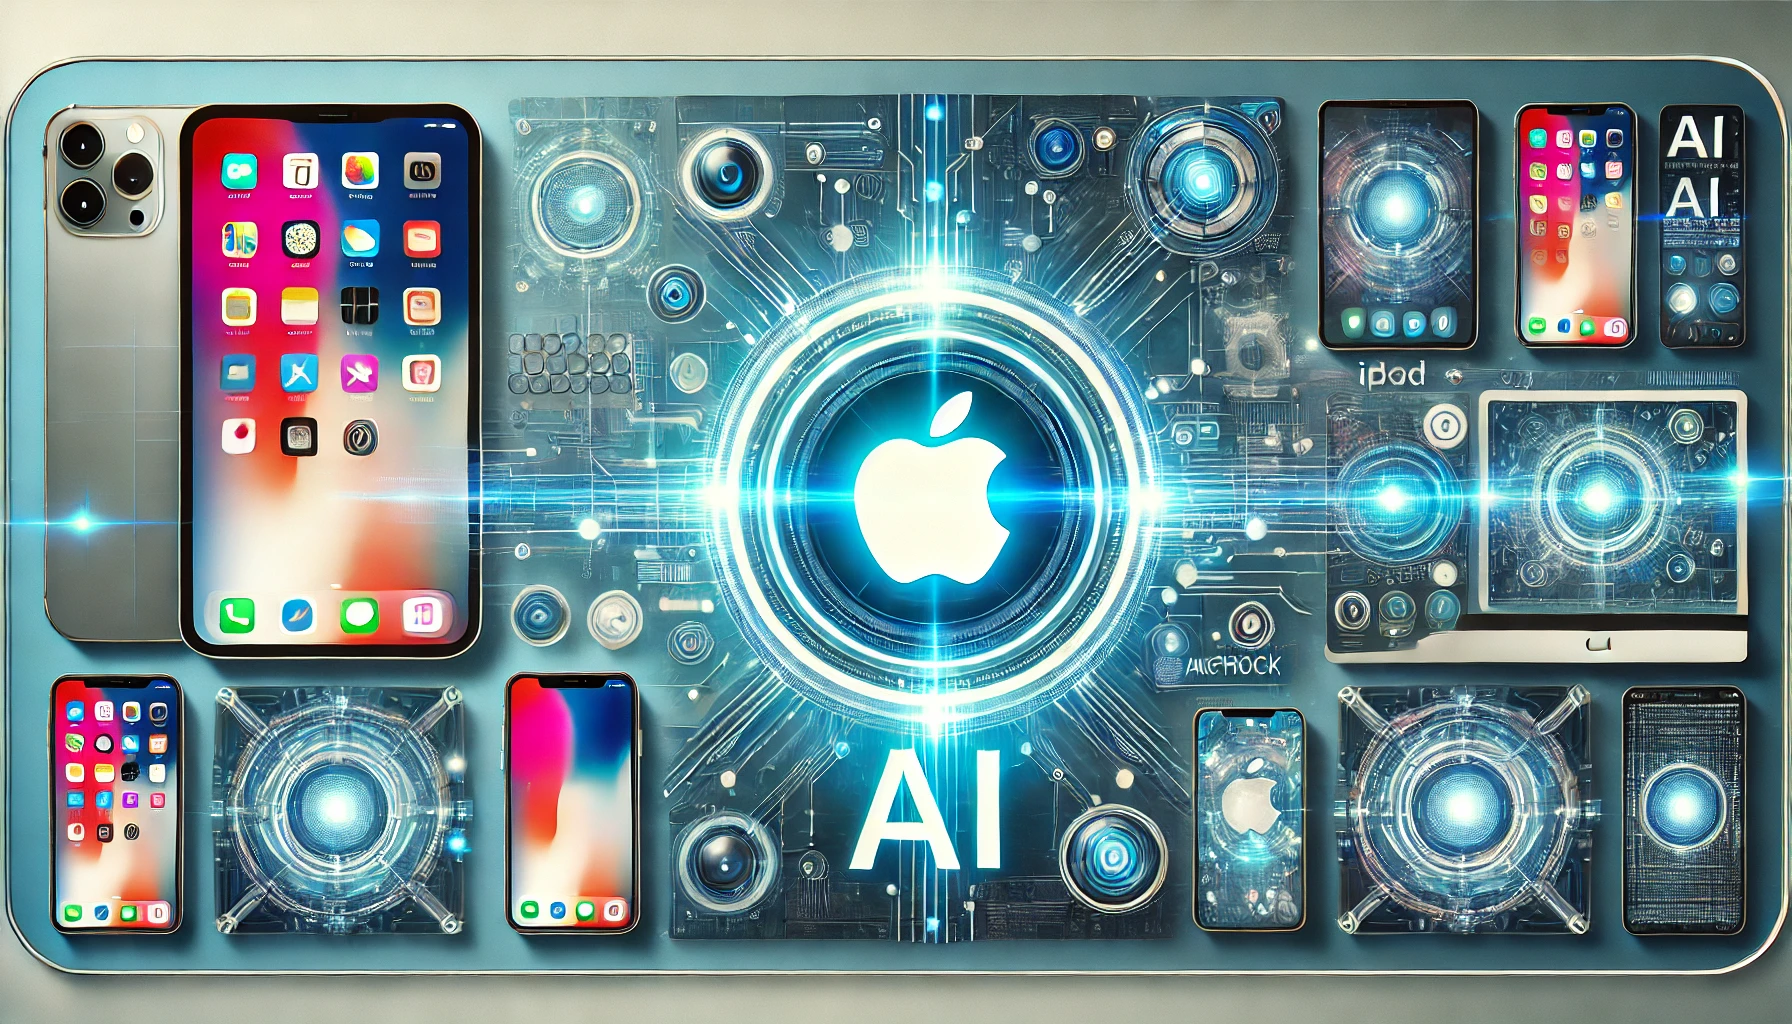 Discover how Apple's groundbreaking AI technology is transforming device interactions with enhanced performance, personalization, and security